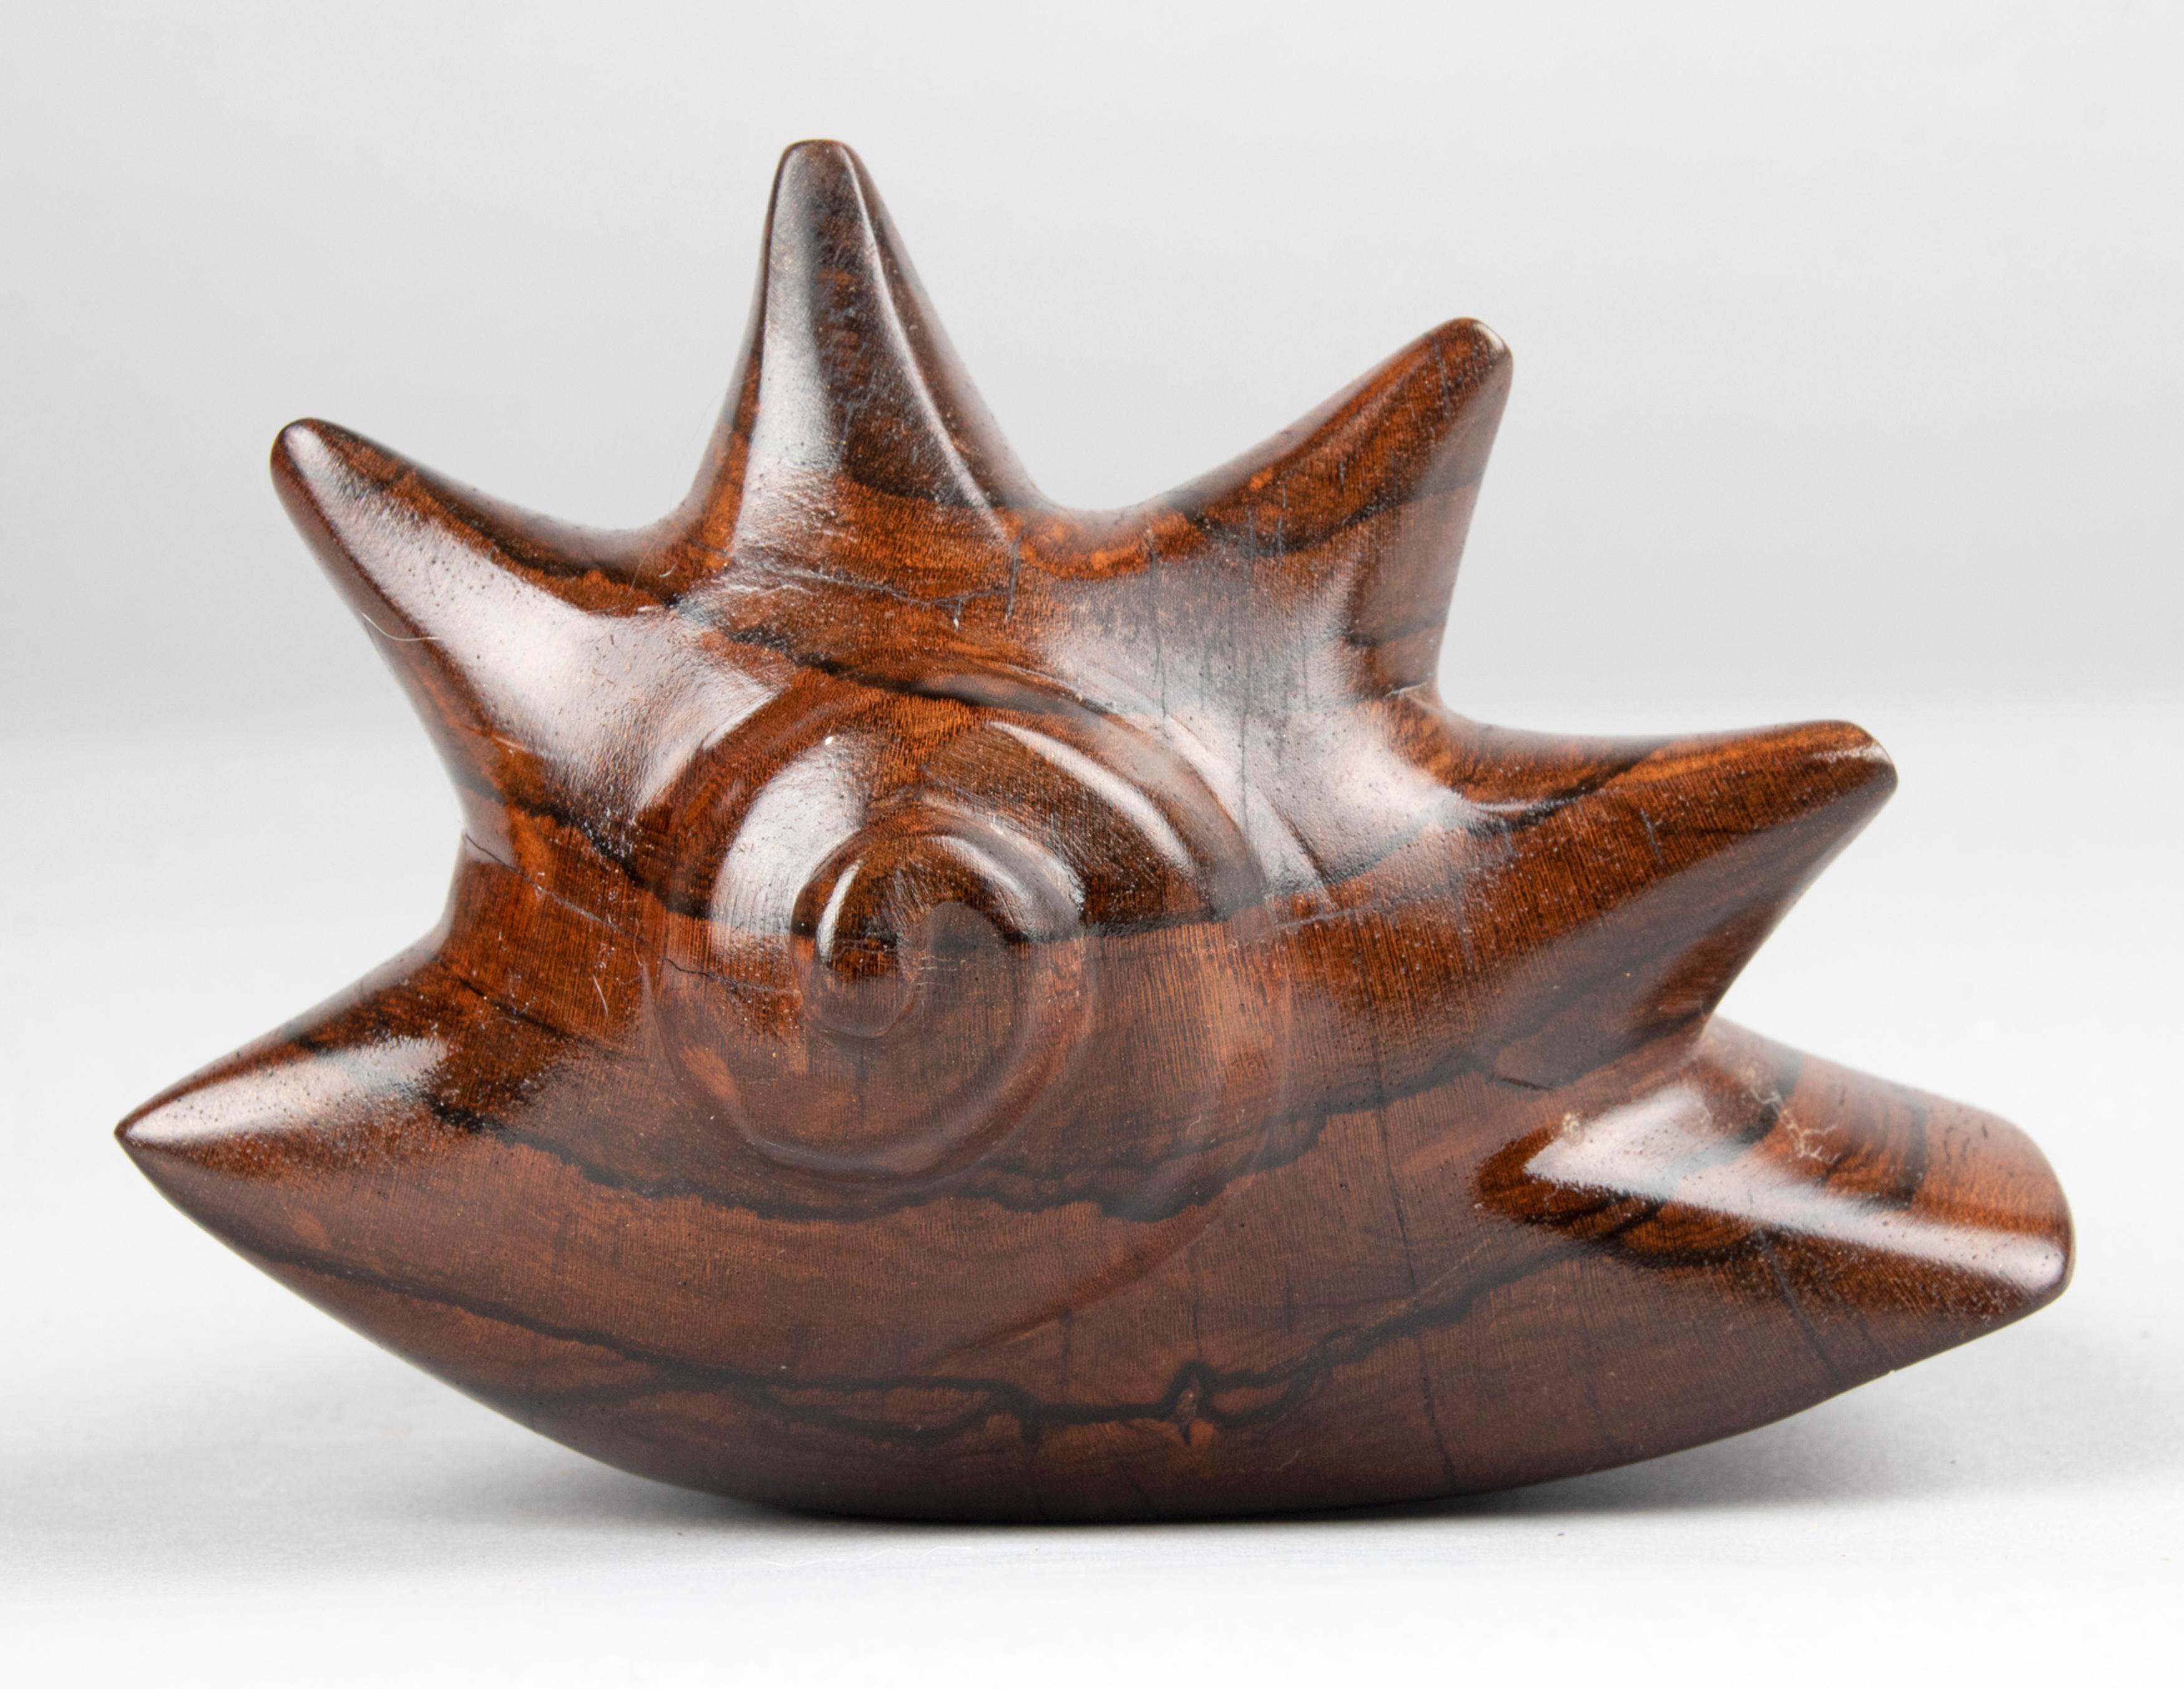 Swedish Mid-Century Modern Wooden Sculpture Shaped as a Shell For Sale